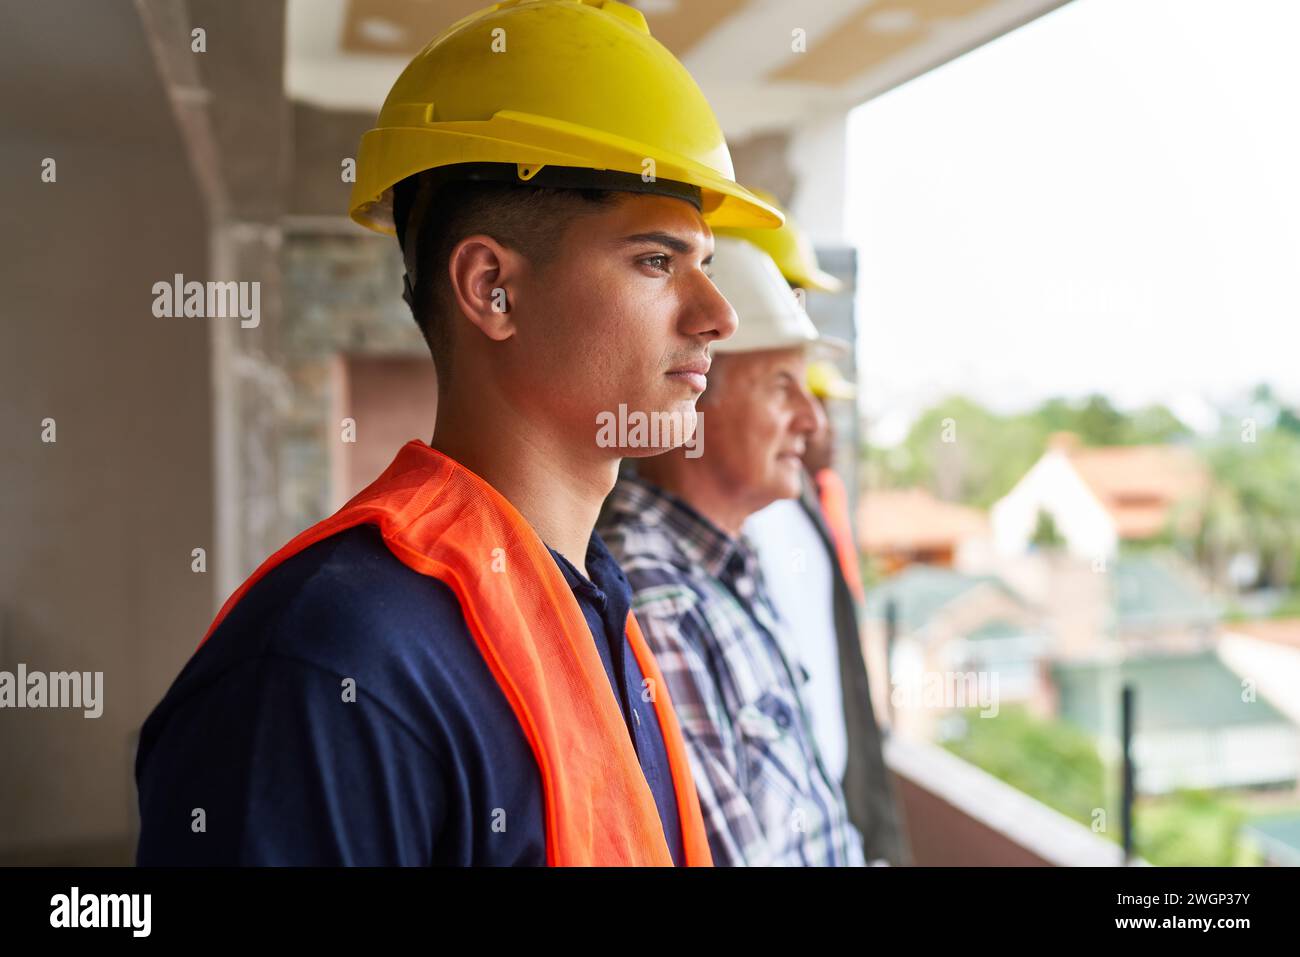 Young construction worker wearing safety workwear Stock Photo